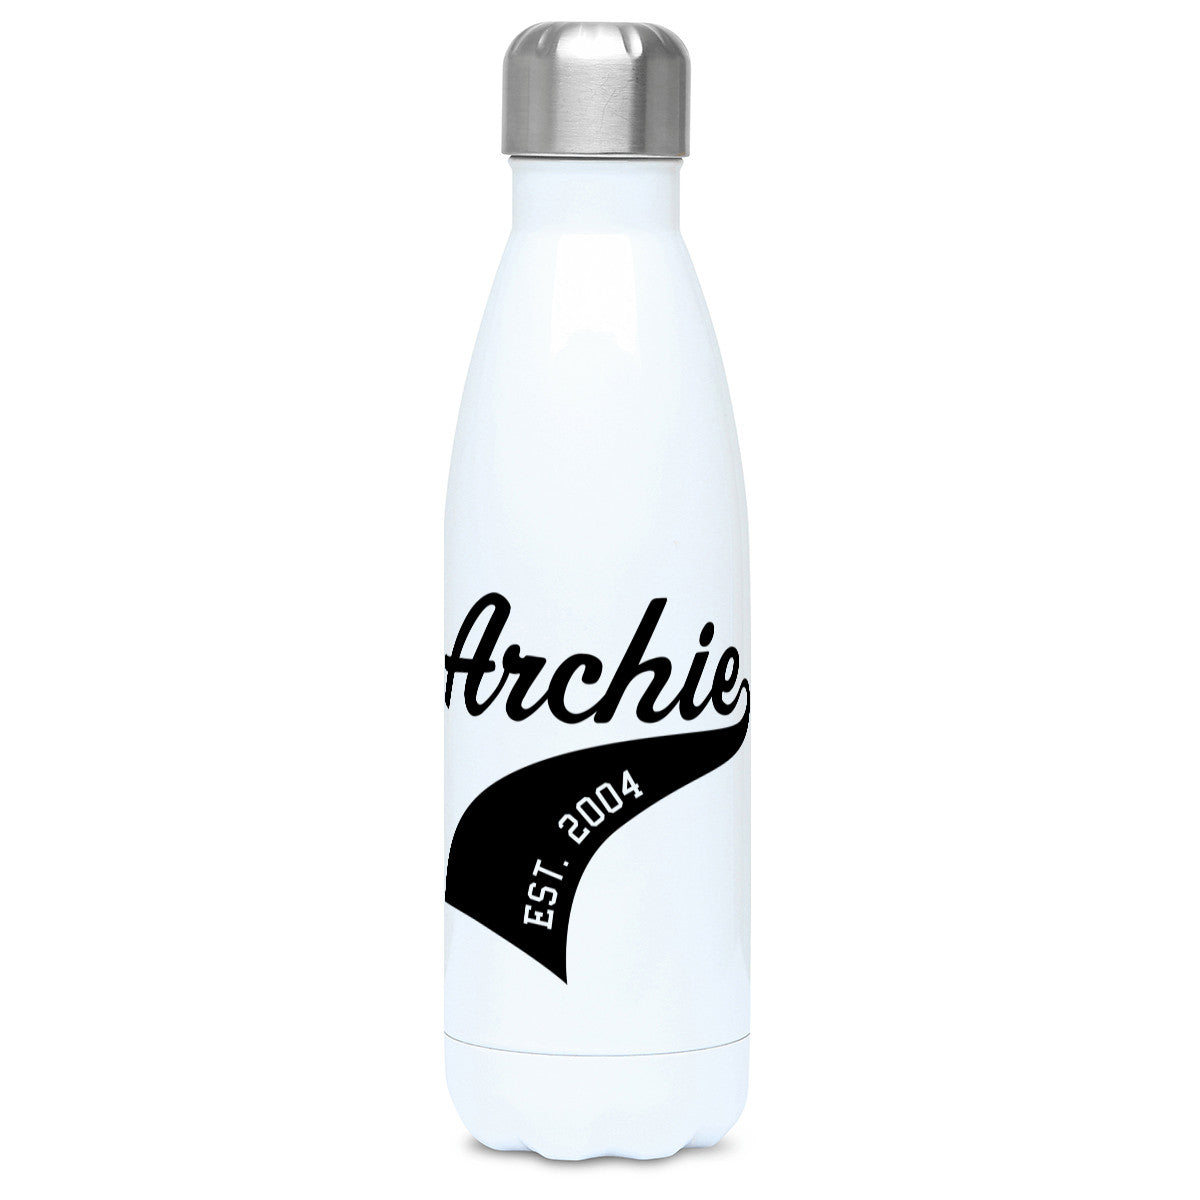 Athletic name and year swish design in black on a white metal insulated drinks bottle, lid on